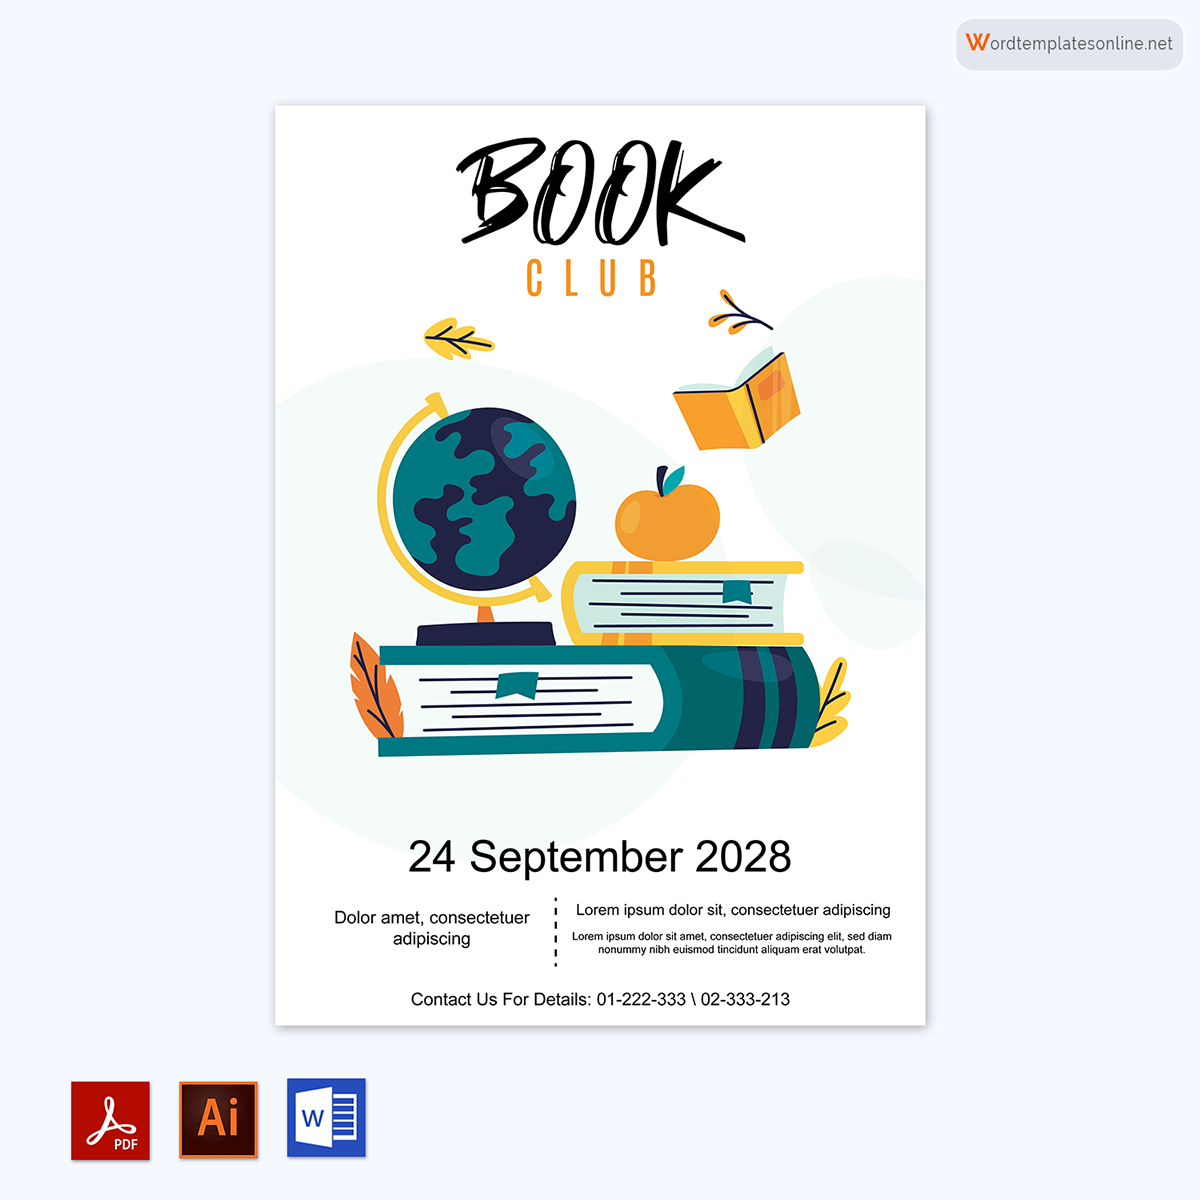 Book Club Flyer Templates - Free Word, PSD, AI Layout